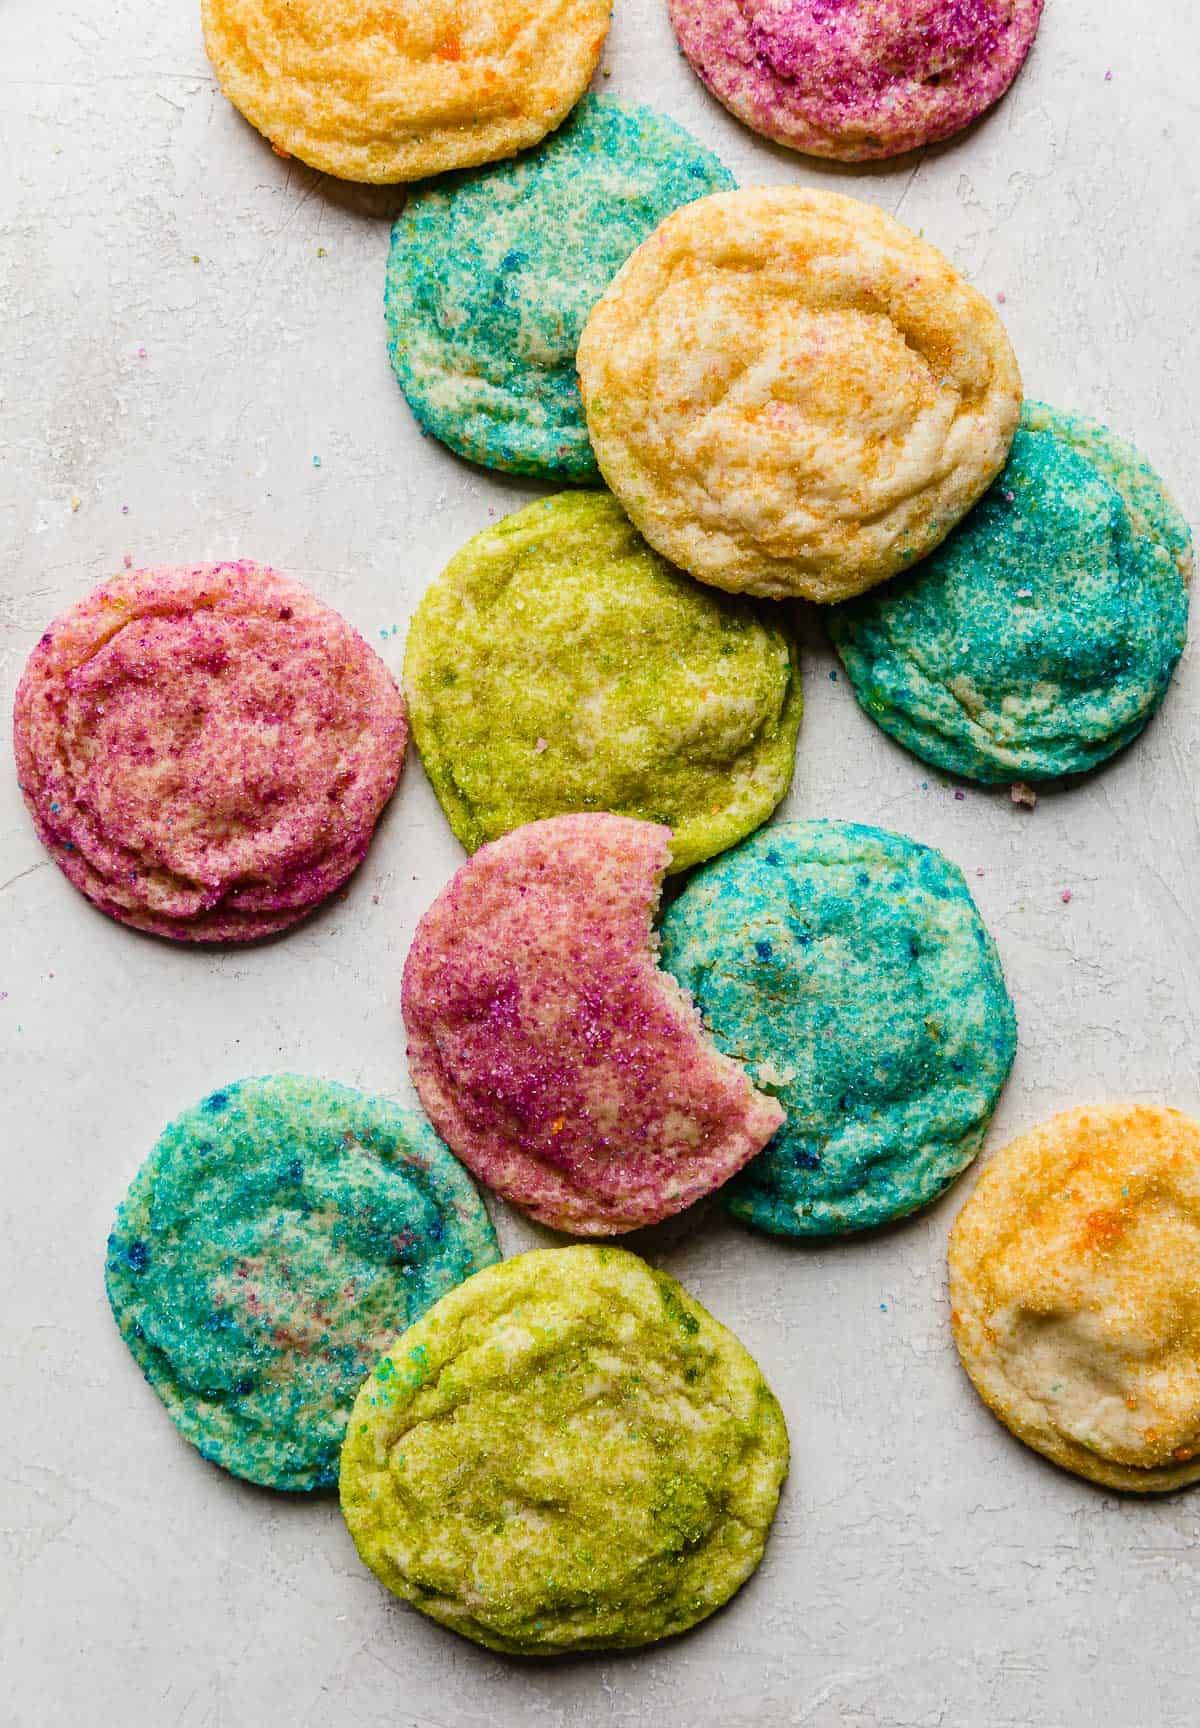 Purple, blue, yellow, and green sugar coated cookies on a white background.